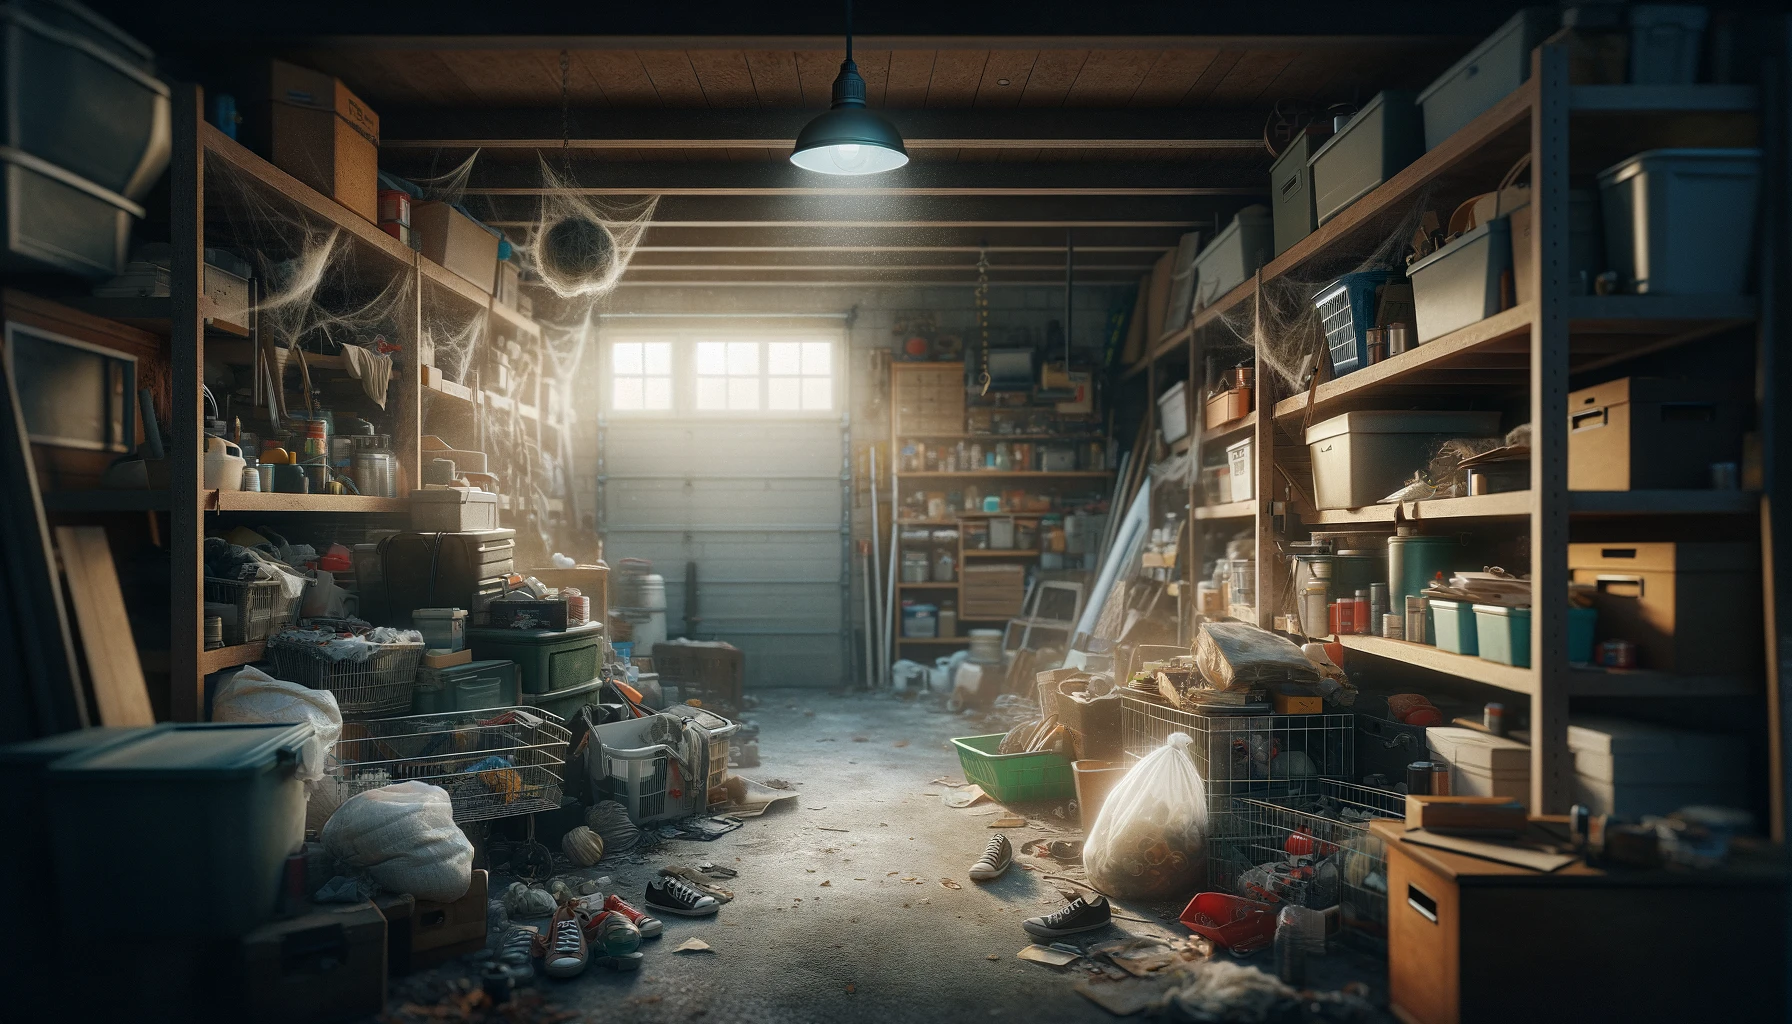 Sunlit cluttered garage interior with cobwebs and stored items.